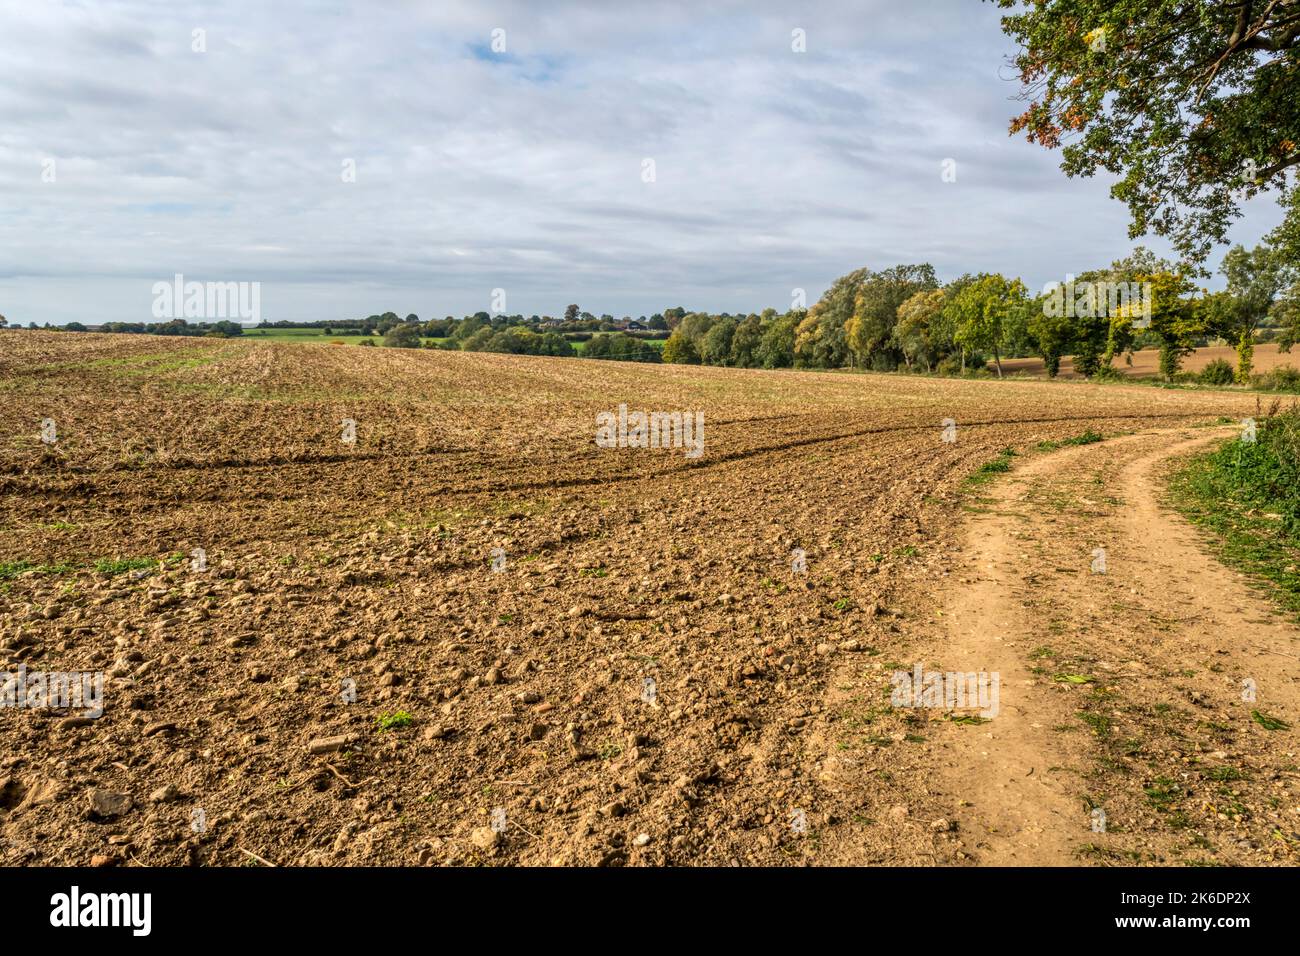 Agricultural land near Braintree in Essex, classed as Grade 3 Good to Moderate in the Agricultural Land Classification of England and Wales. Stock Photo